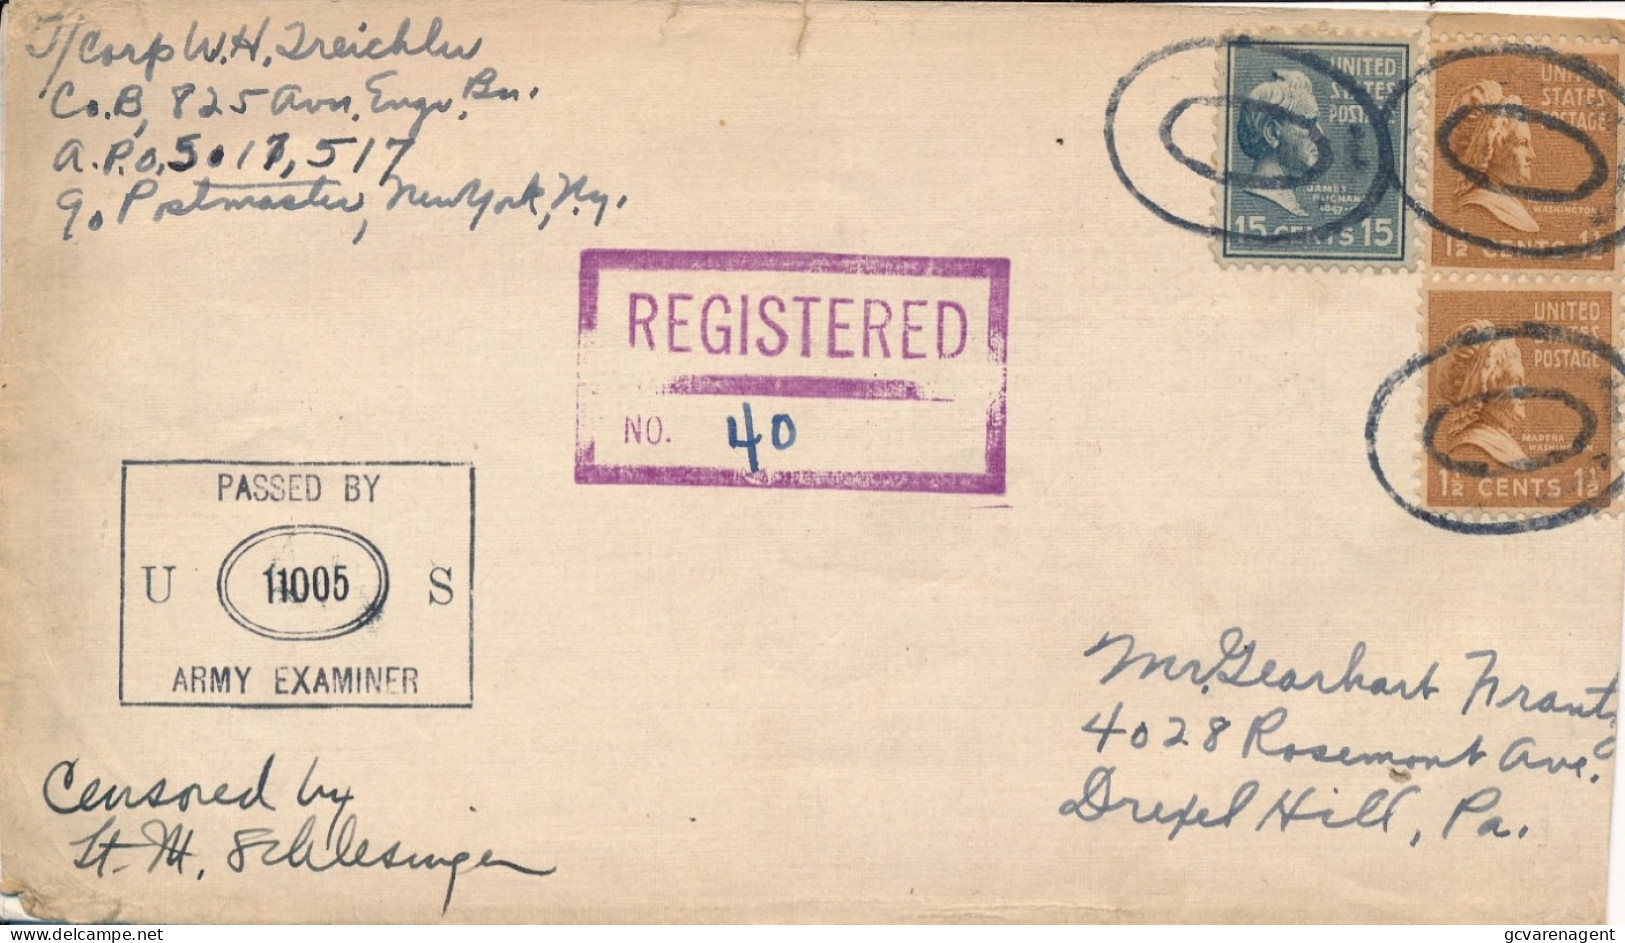 COVER 1942 WWII - REGISTERED - PASSED BY ARMY EXAMINER   TO DRIPEL HILL PA - Covers & Documents